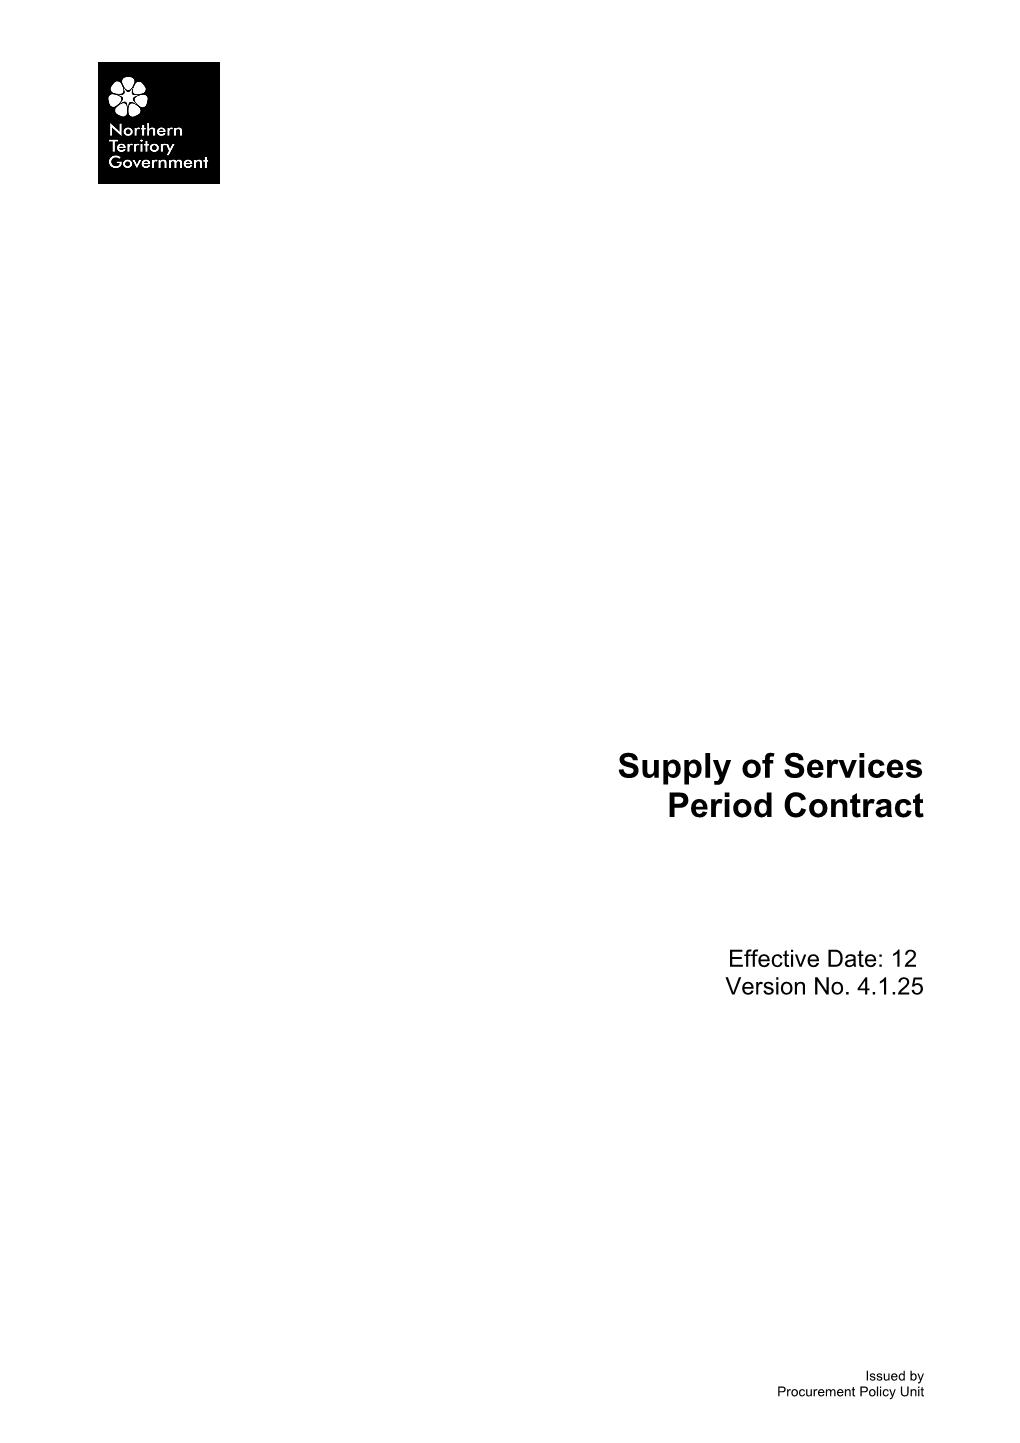 Supply of Services - Period Contract - V 4.1.25 (12 December 2008)